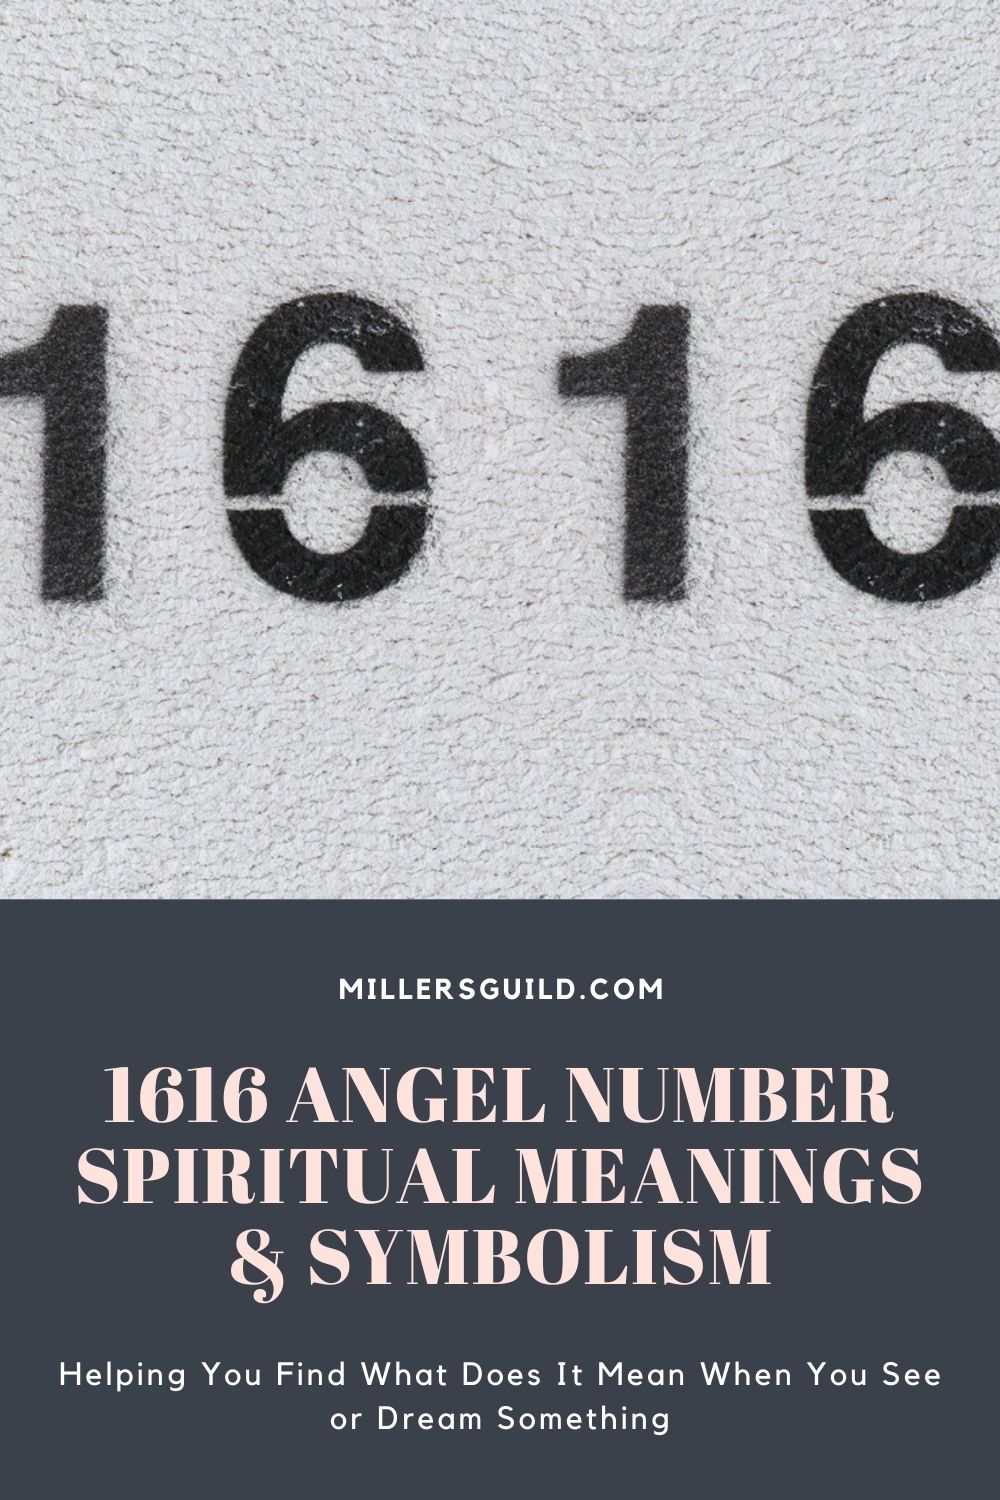 1616 Angel Number Spiritual Meanings & Symbolism 1